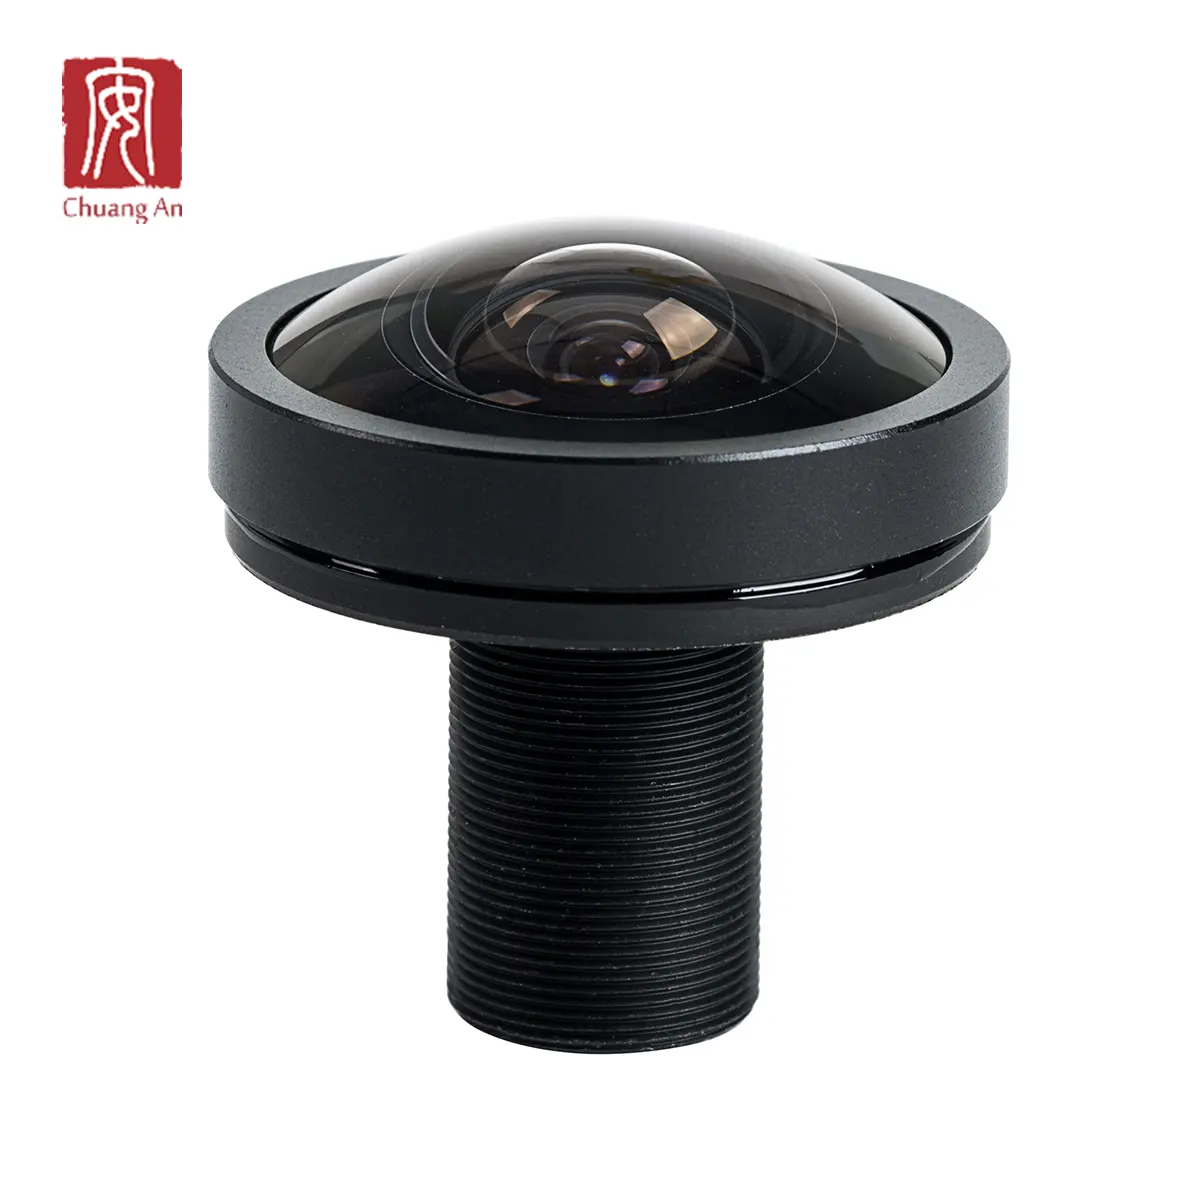 1/3" Inch 5MP 1.0mm Focal Length 185 Degree M12 Fisheye Lens for IMX322 and IMX335 Panoramic CCTV Surveillance Camera